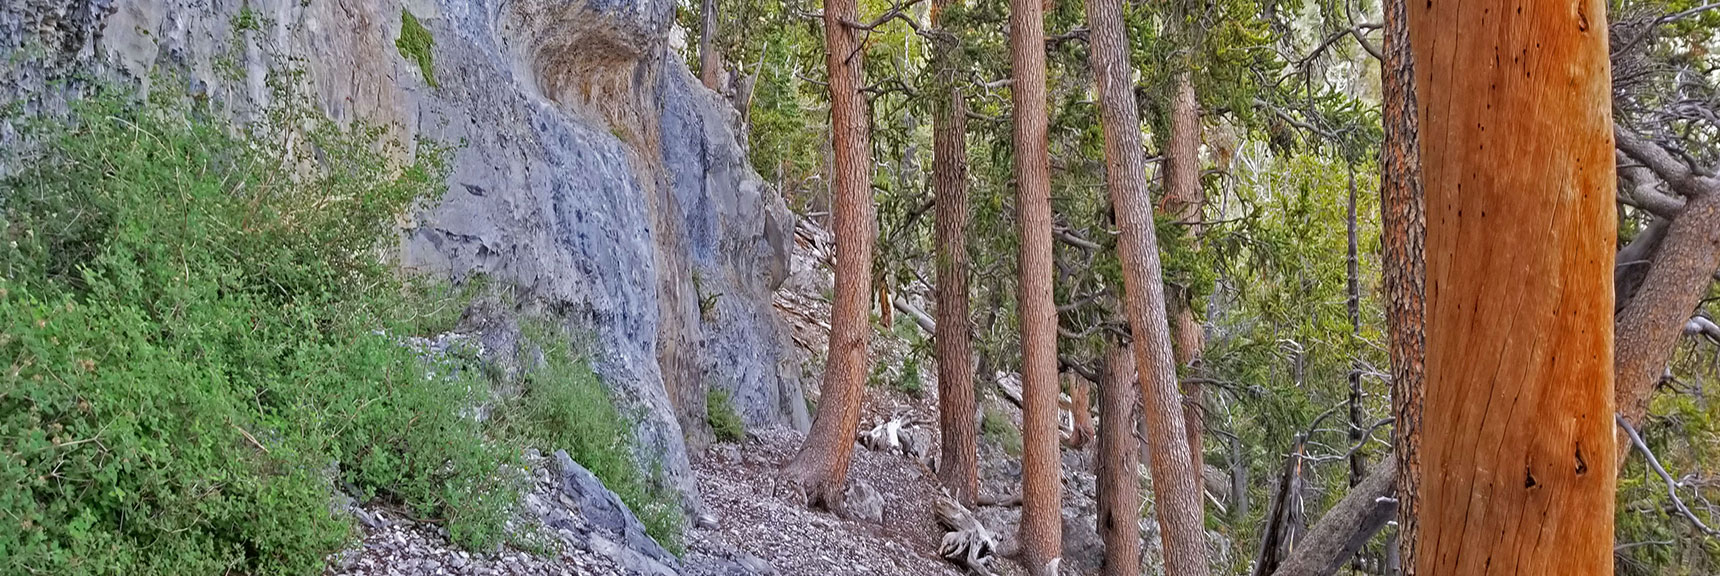 Skirting the Base of the 50-Yard Cliff Line Leading to the Gully Gap | Lee and Charleston Peaks via Lee Canyon Mid Ridge | Mt Charleston Wilderness | Spring Mountains, Nevada